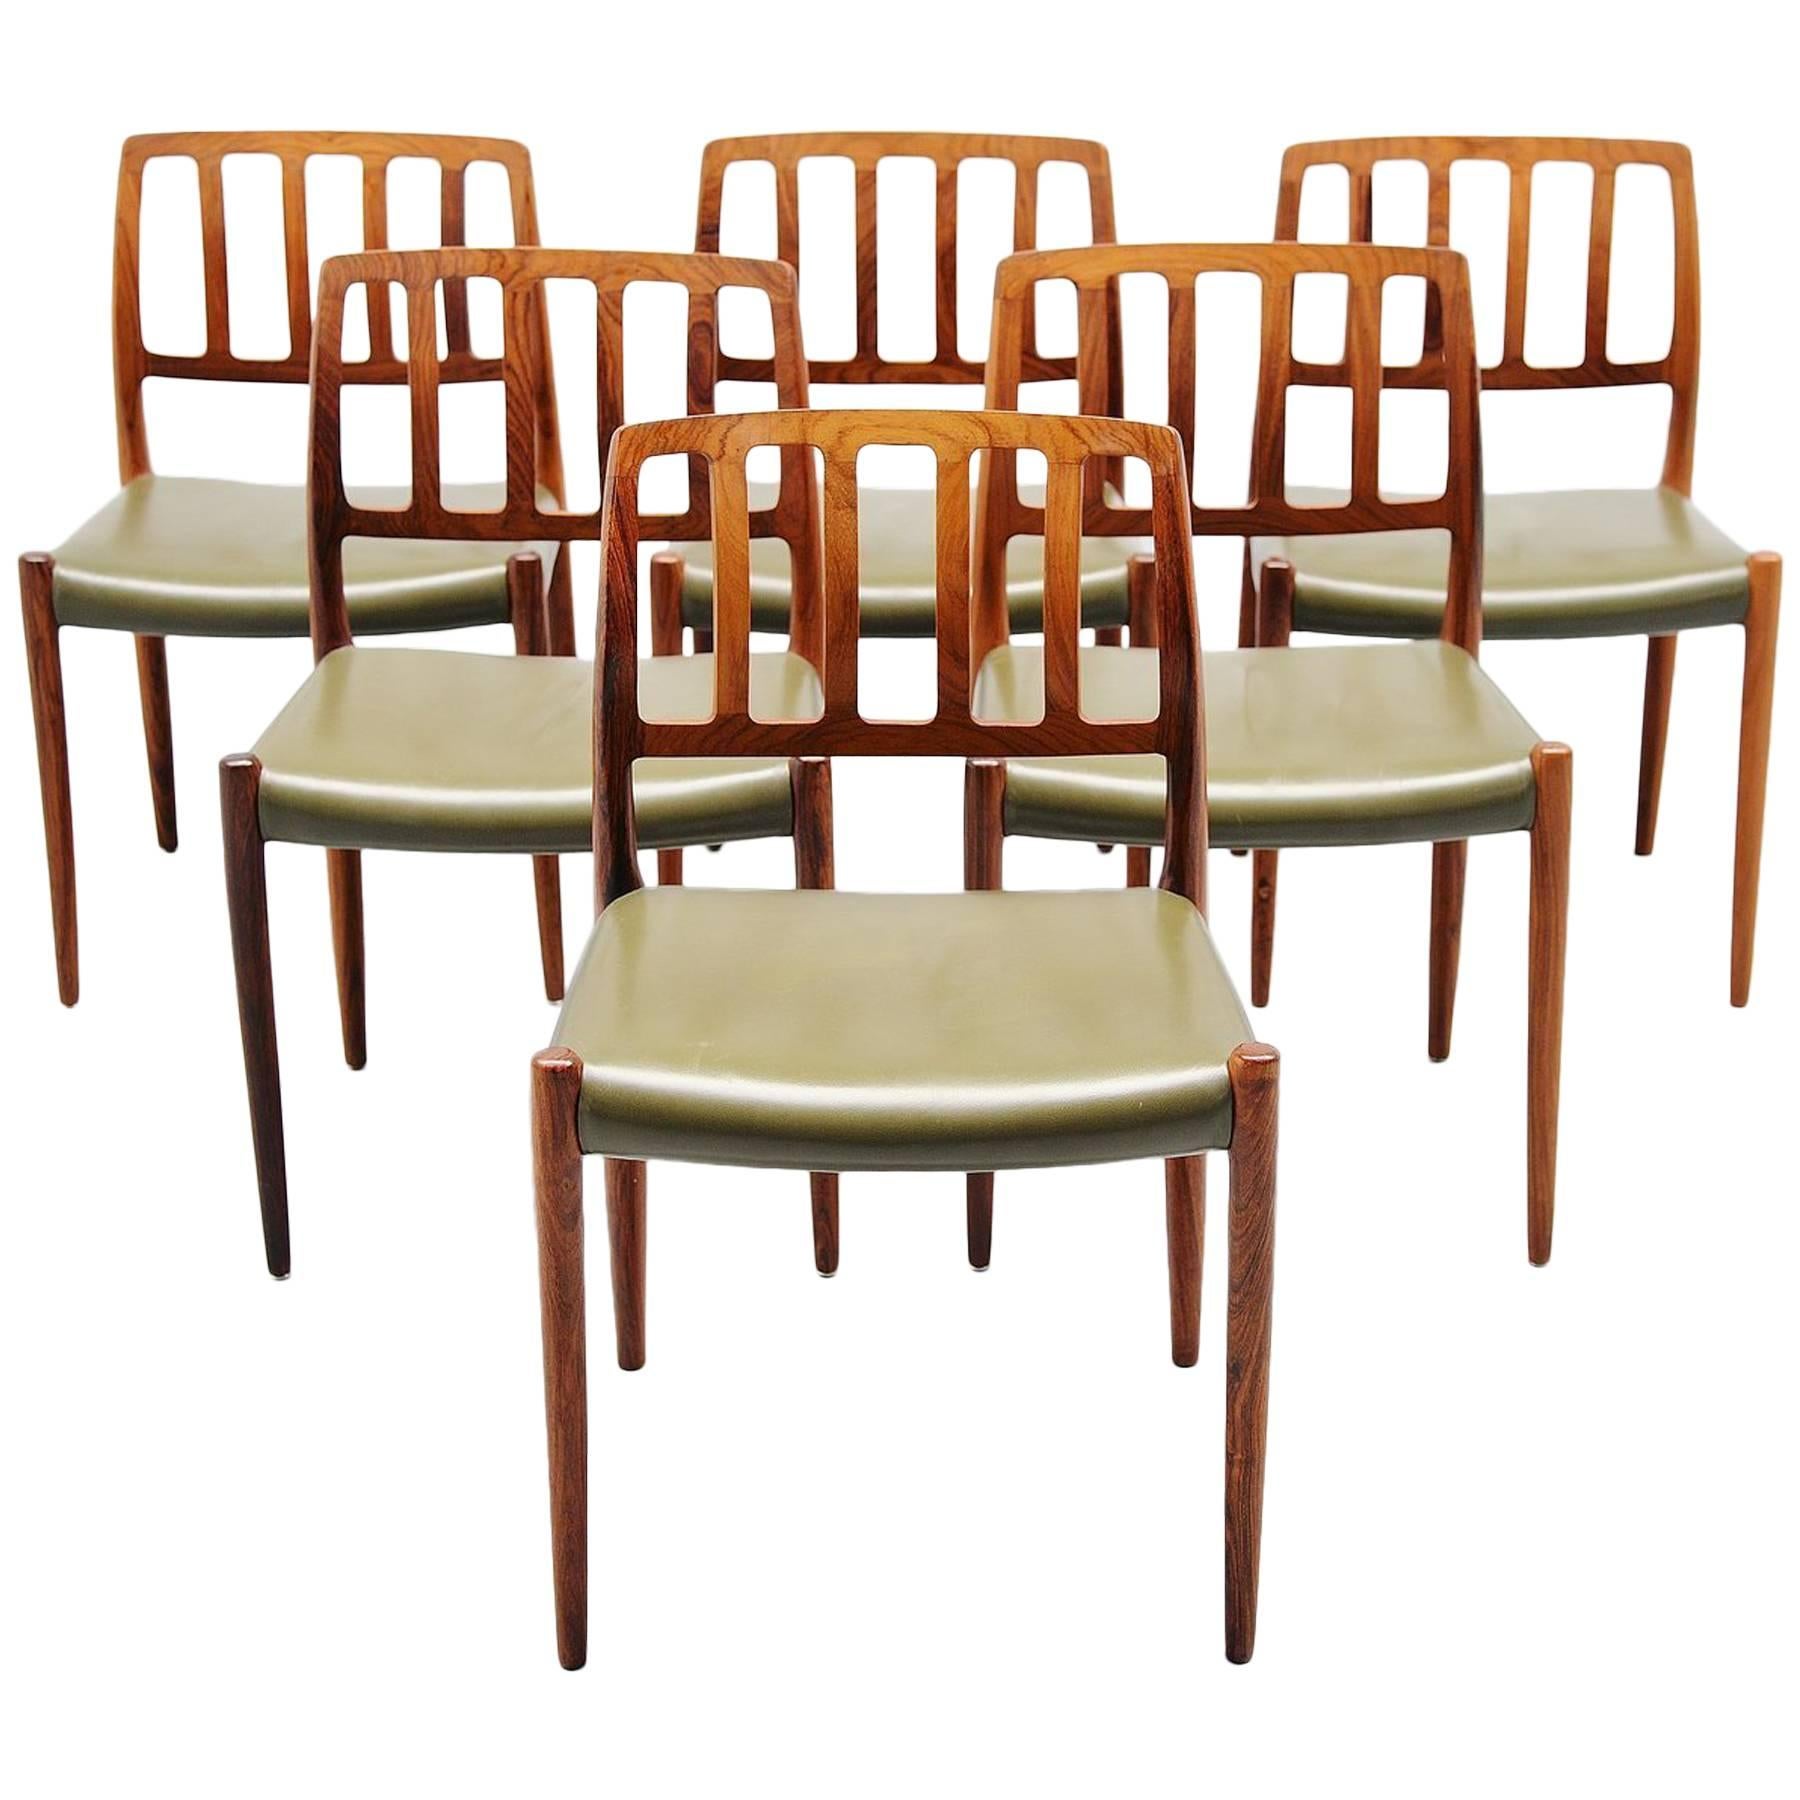 Niels Moller Model 83 Dining Chairs in Rosewood, Denmark, 1974